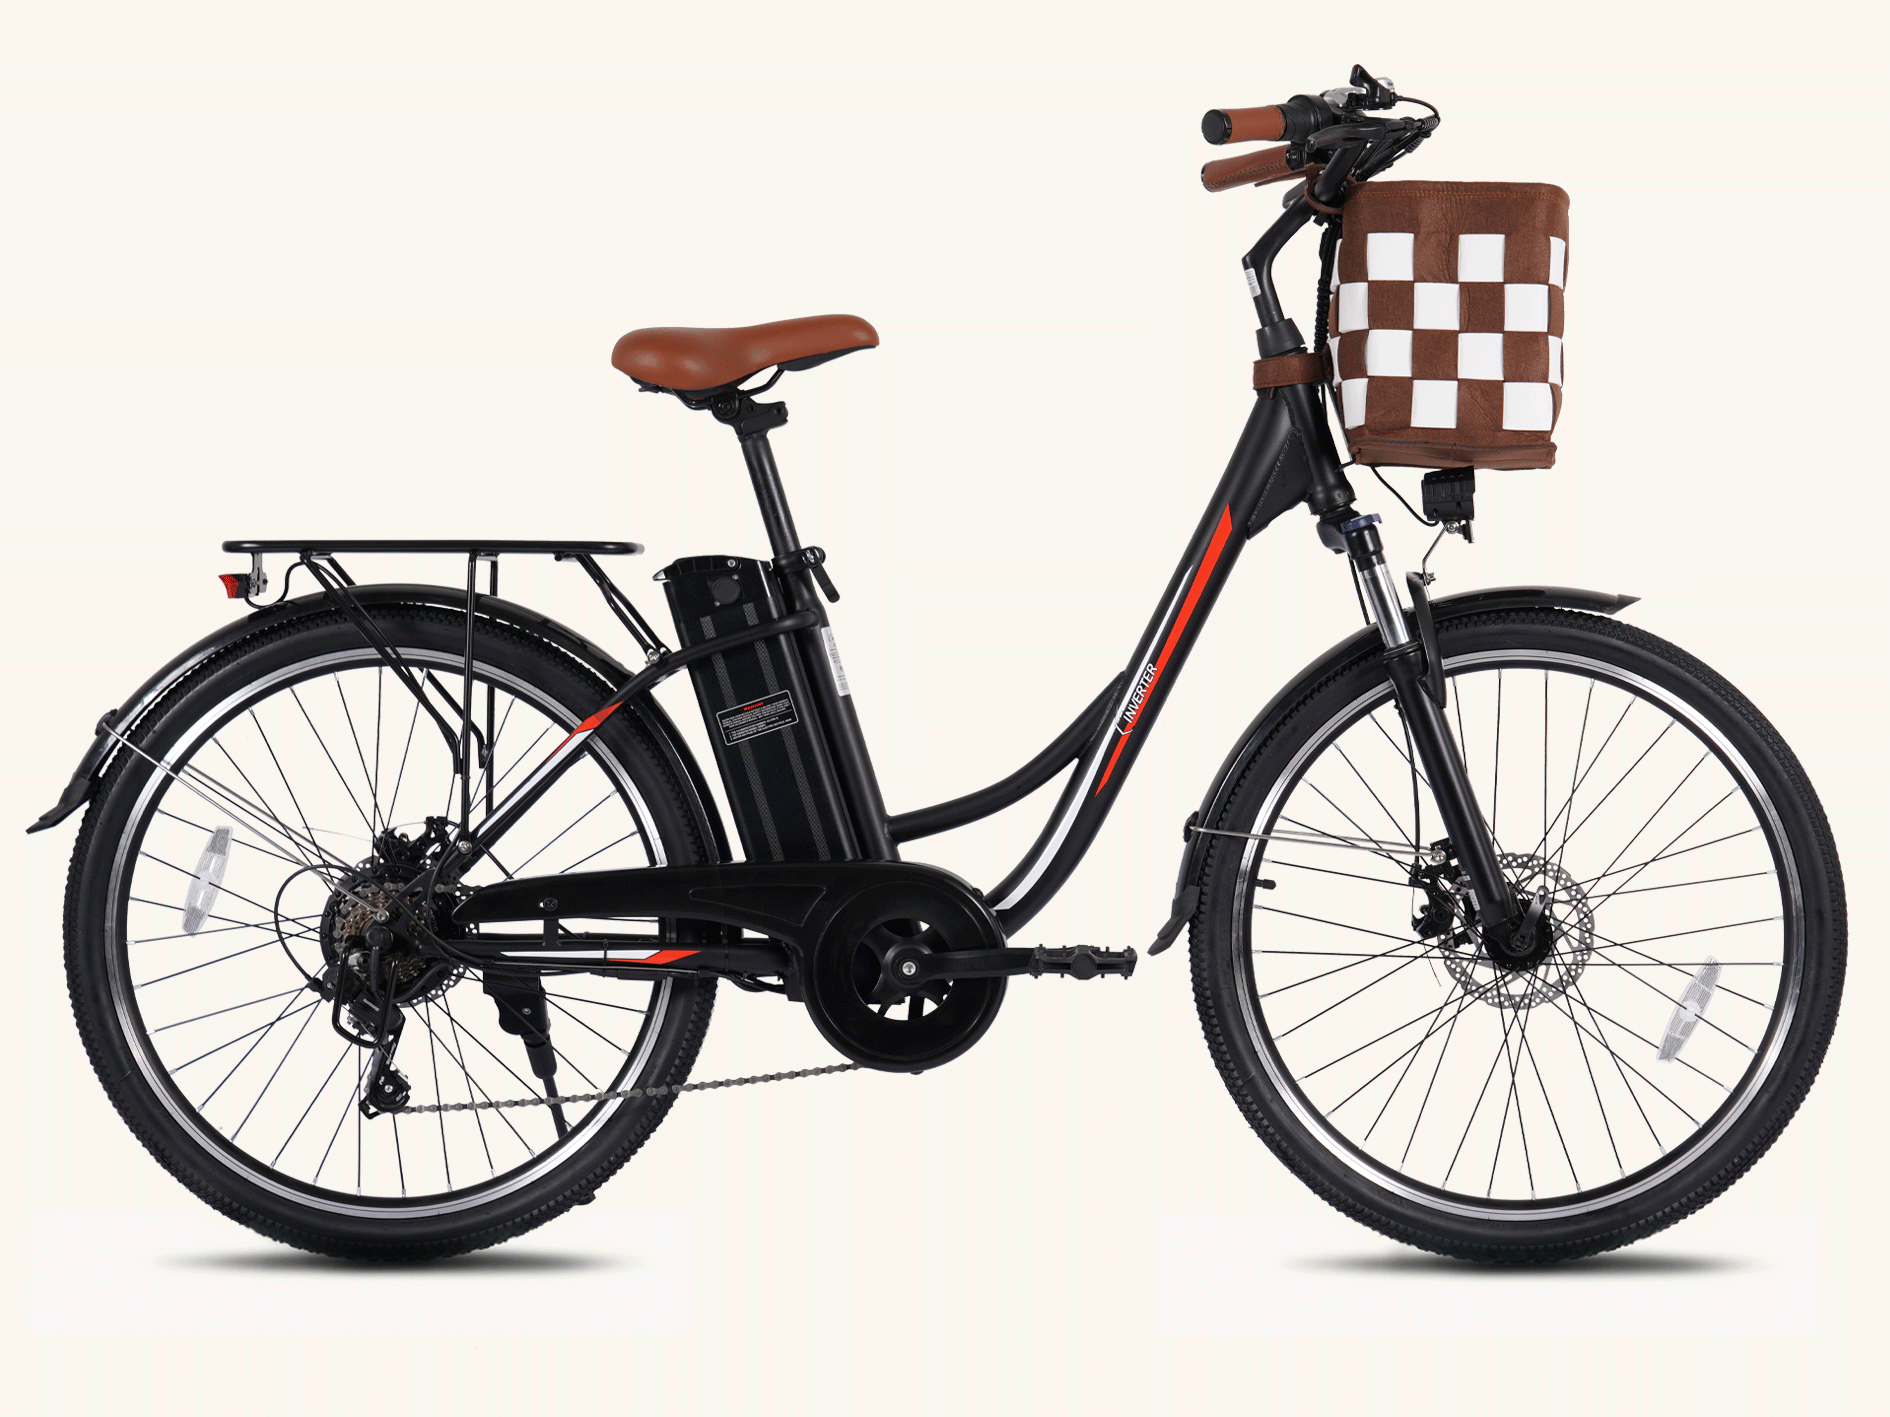 C INVERTER LIBRA Electric Bike 26", Ebikes for Adults 350W Brushless Motor 32KM/H, 36V 11.6AH Removable Battery, Dual Suspension E-Bike with 7-Speed for City Commuting